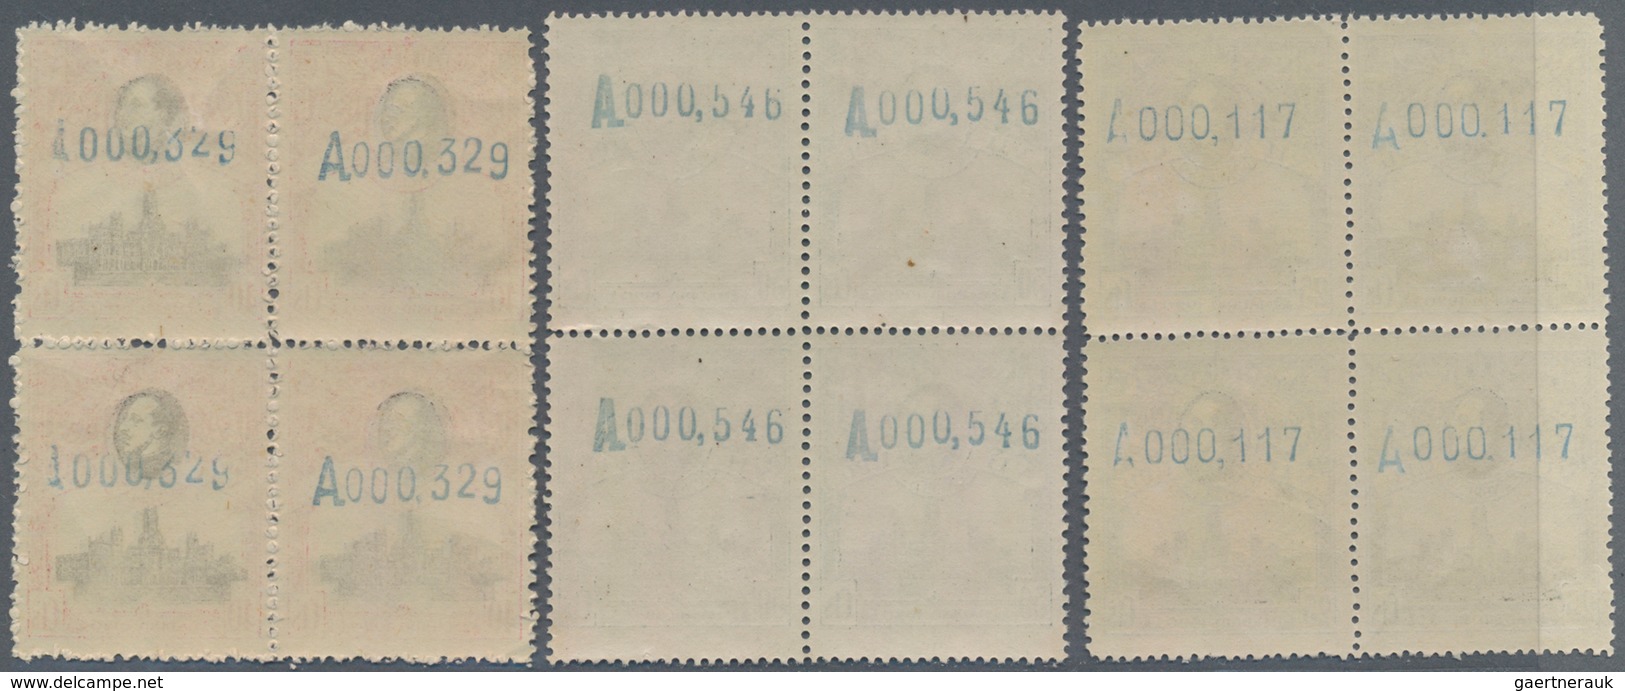 Spanien: 1920, 7th United Postal Union Congress complete set in blocks of four with 1c. + 2c. withou